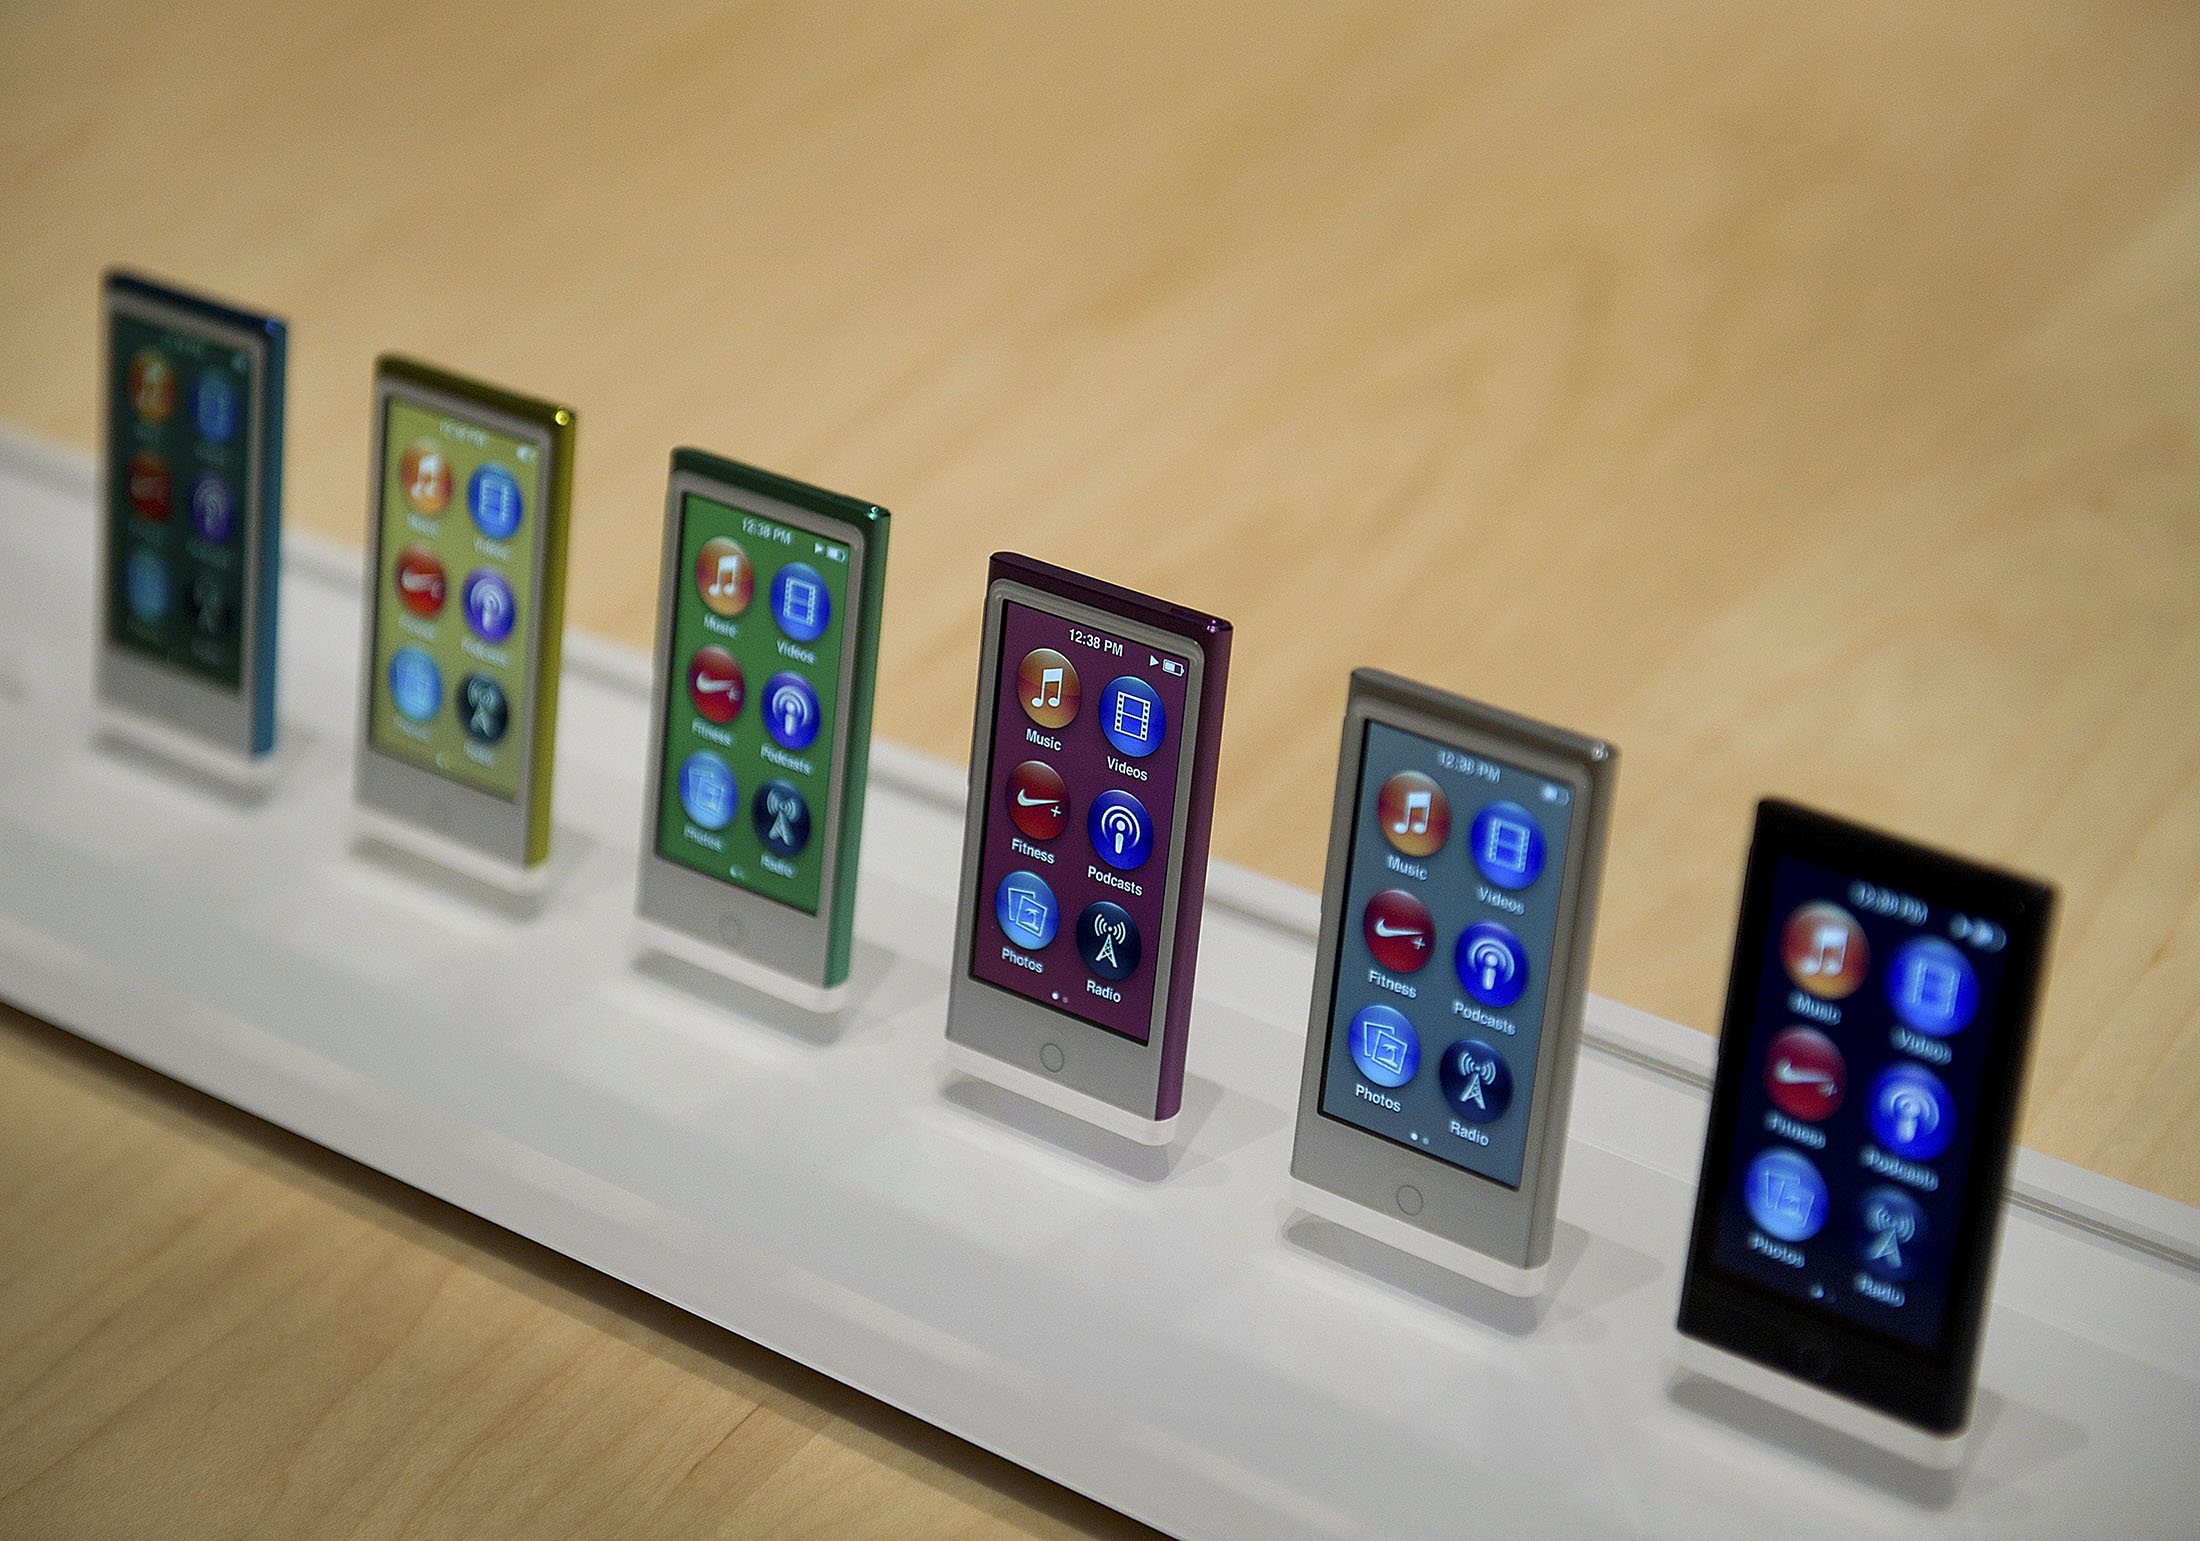 Can you still buy an iPod Shuffle or Nano? Apple says they're